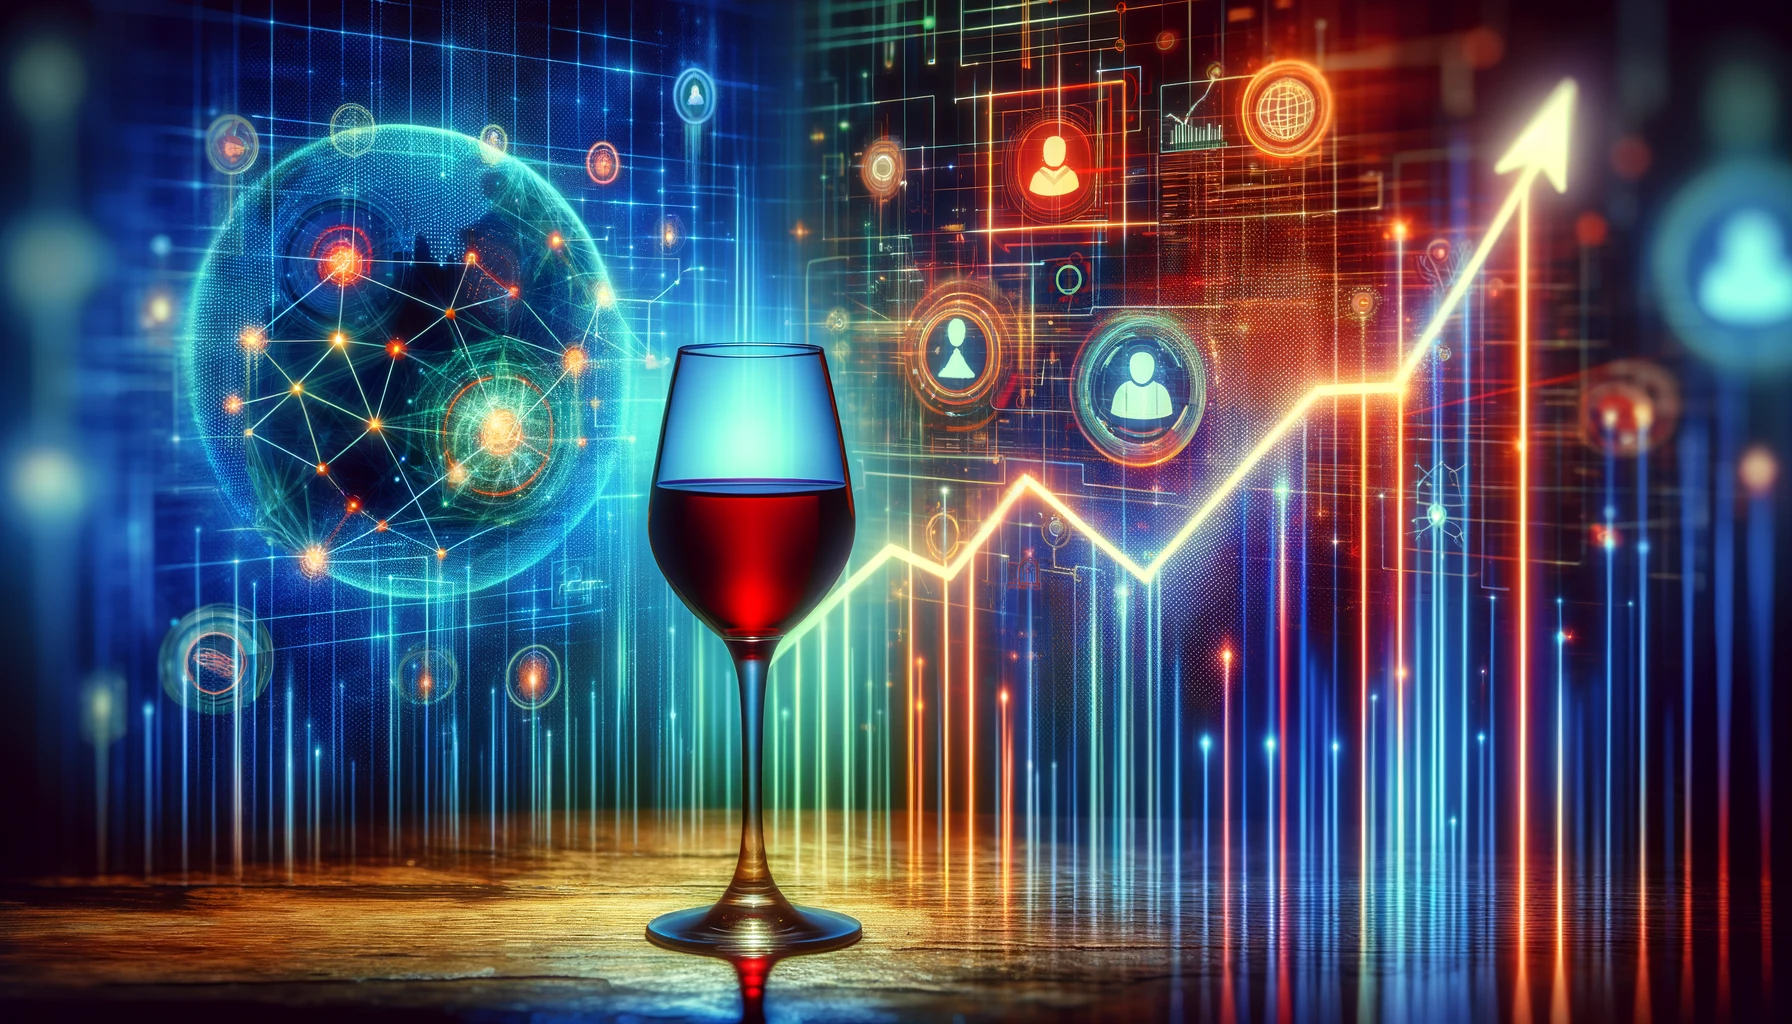 Tools and Resources for Wine Valuation